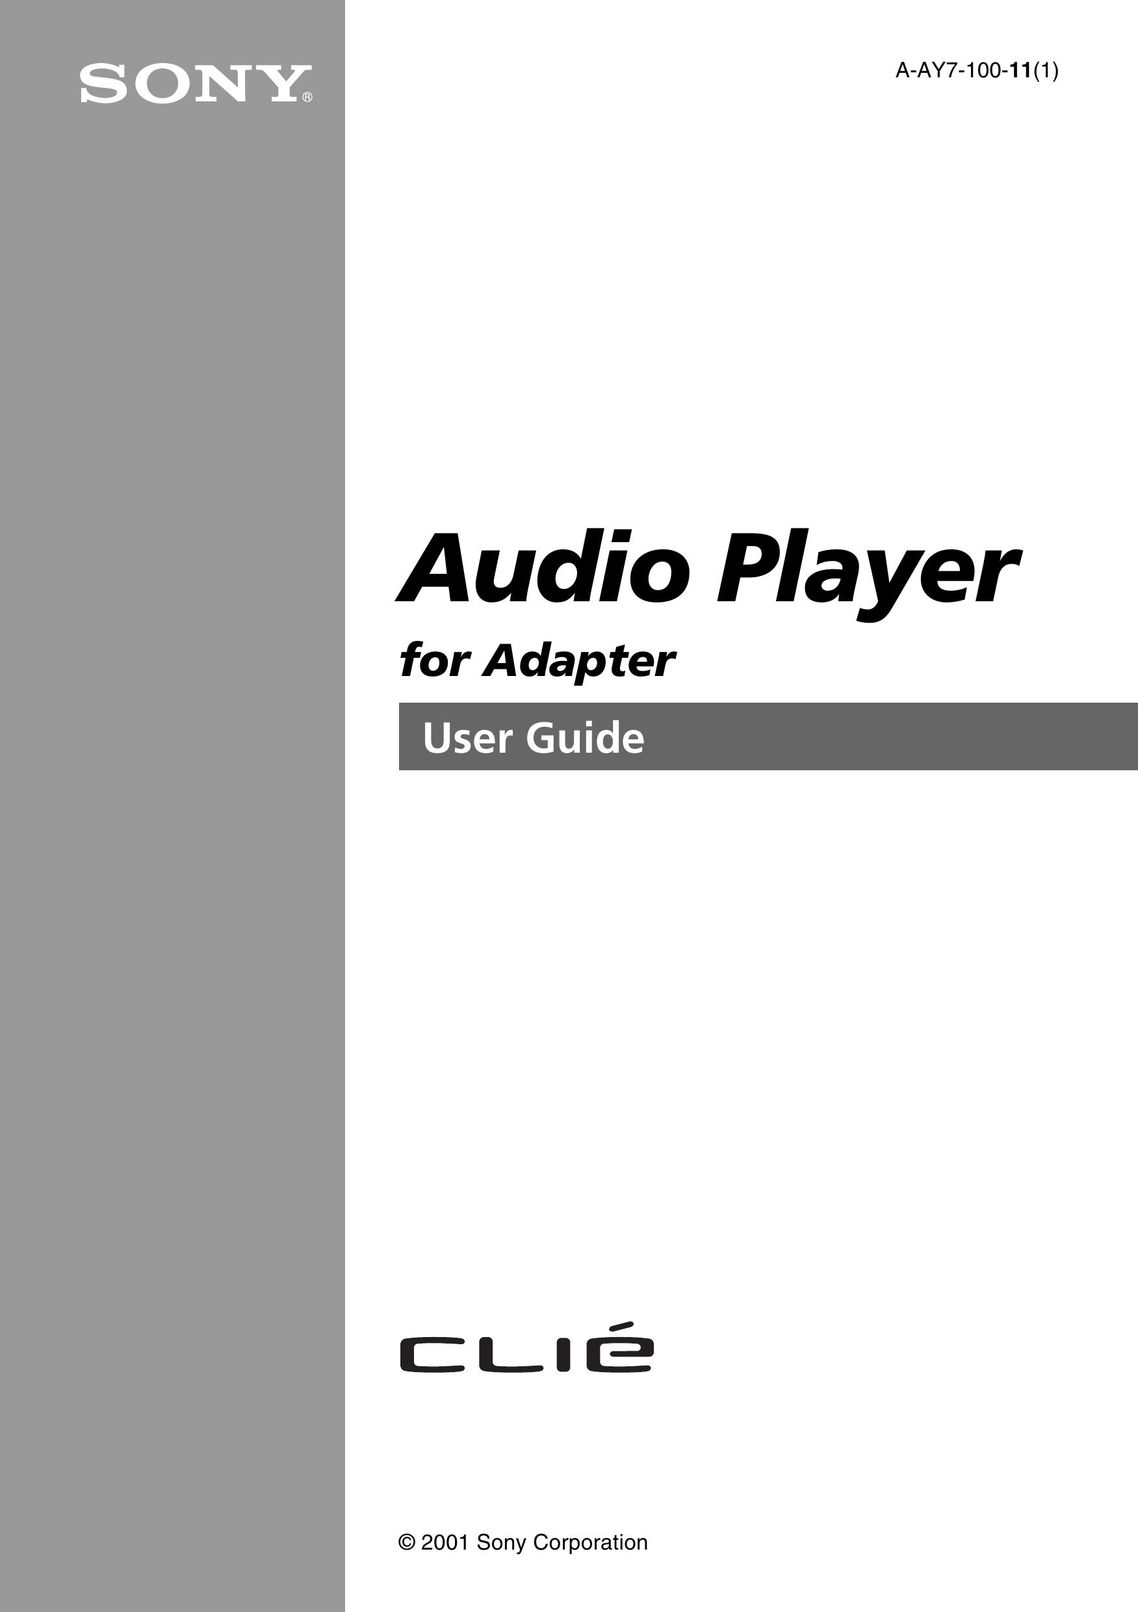 Sony A-AY7-100-11(1) MP3 Player User Manual